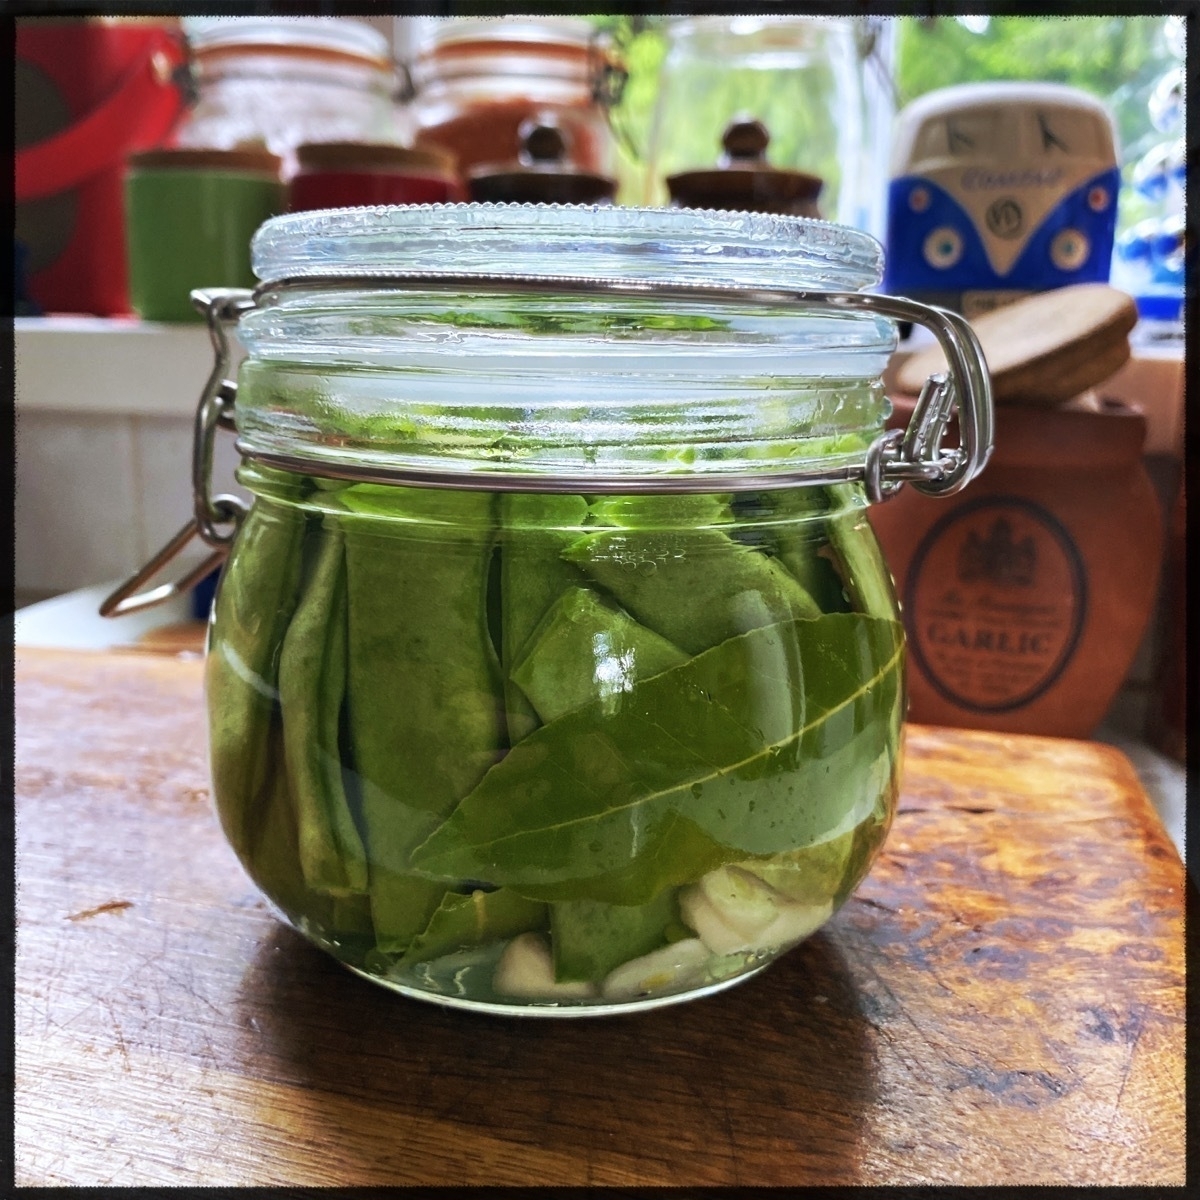 A glass jar filled with pickled green beans and herbs is placed on a wooden surface with various kitchen items in the background.